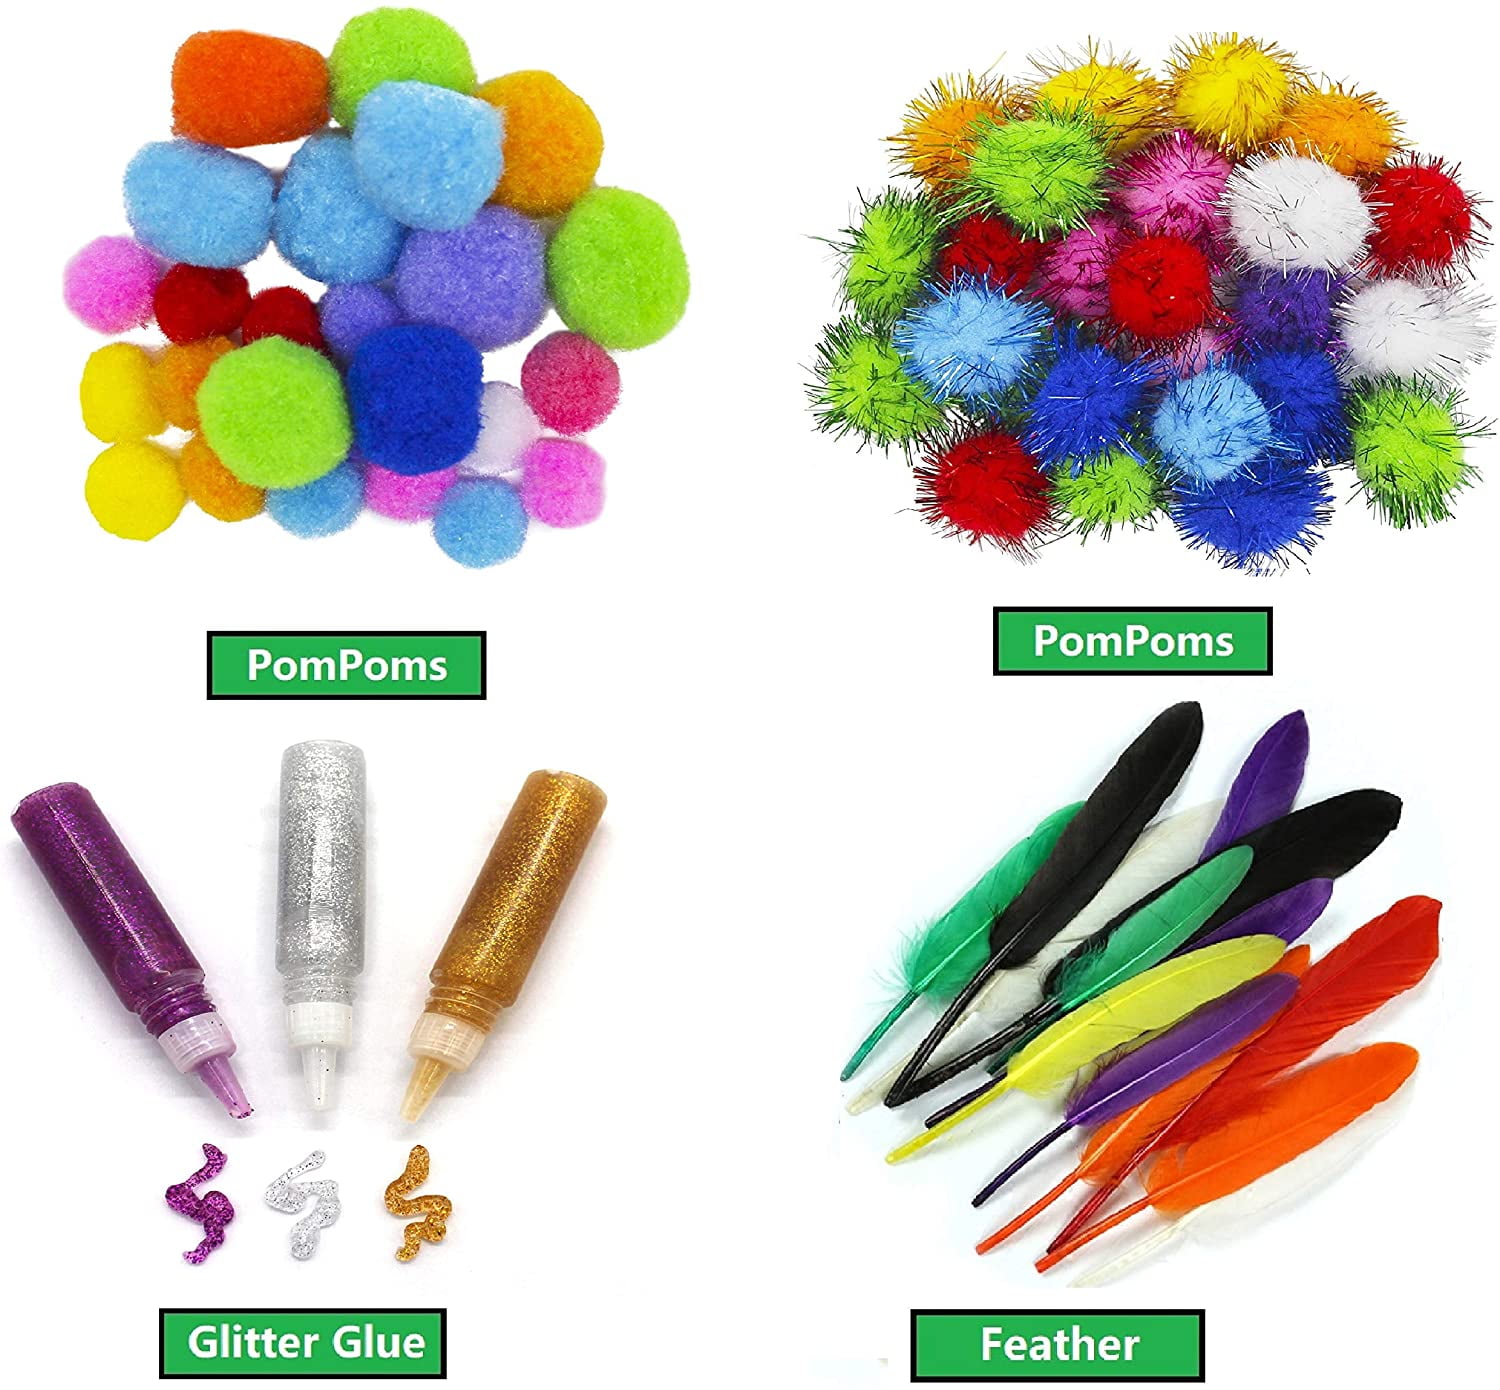 Assorted Arts and Crafts Supplies for Kids Girls Ages 6 7 8 9 10 Letter Beads Pipe Cleaners Pom Poms,Glue,Sticks,Wiggle Googly Eyes,All in One Toddler Crafts Set for School Projects DIY Activities